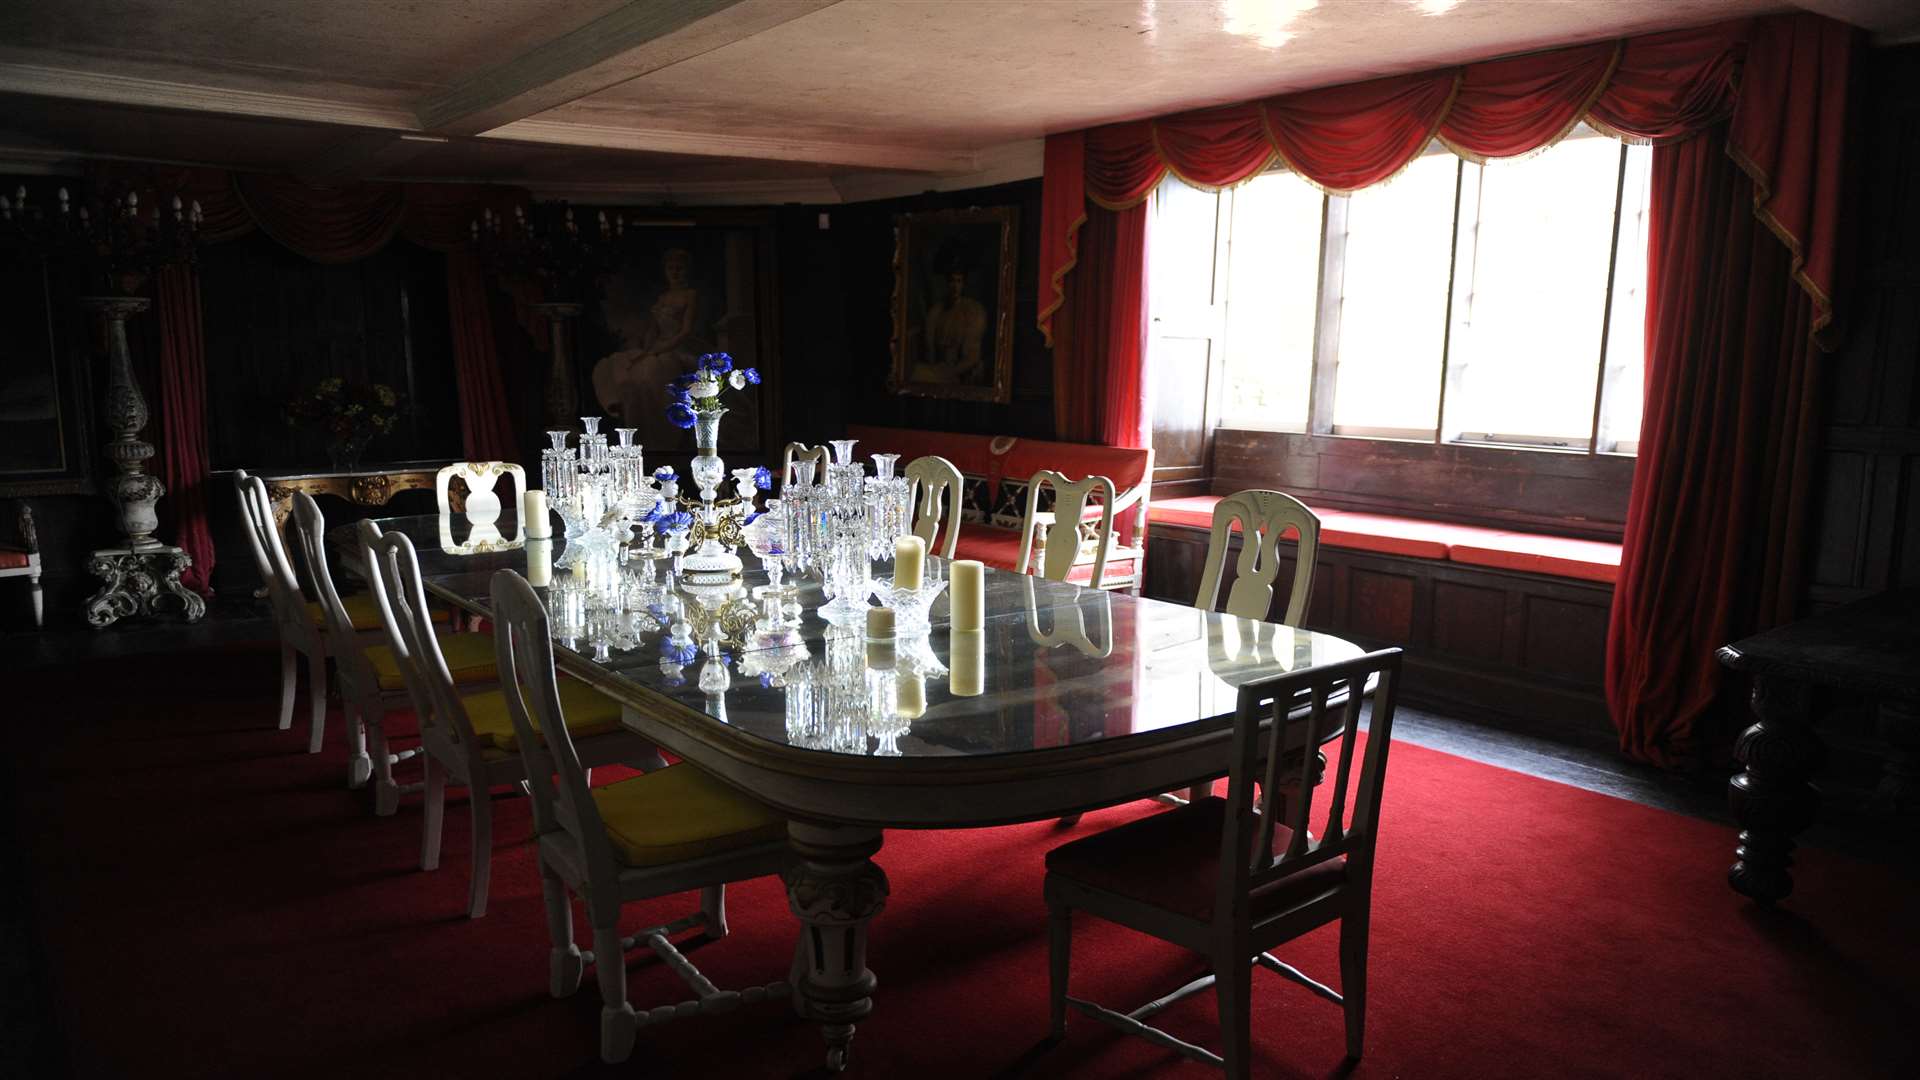 The dining room of Provender House